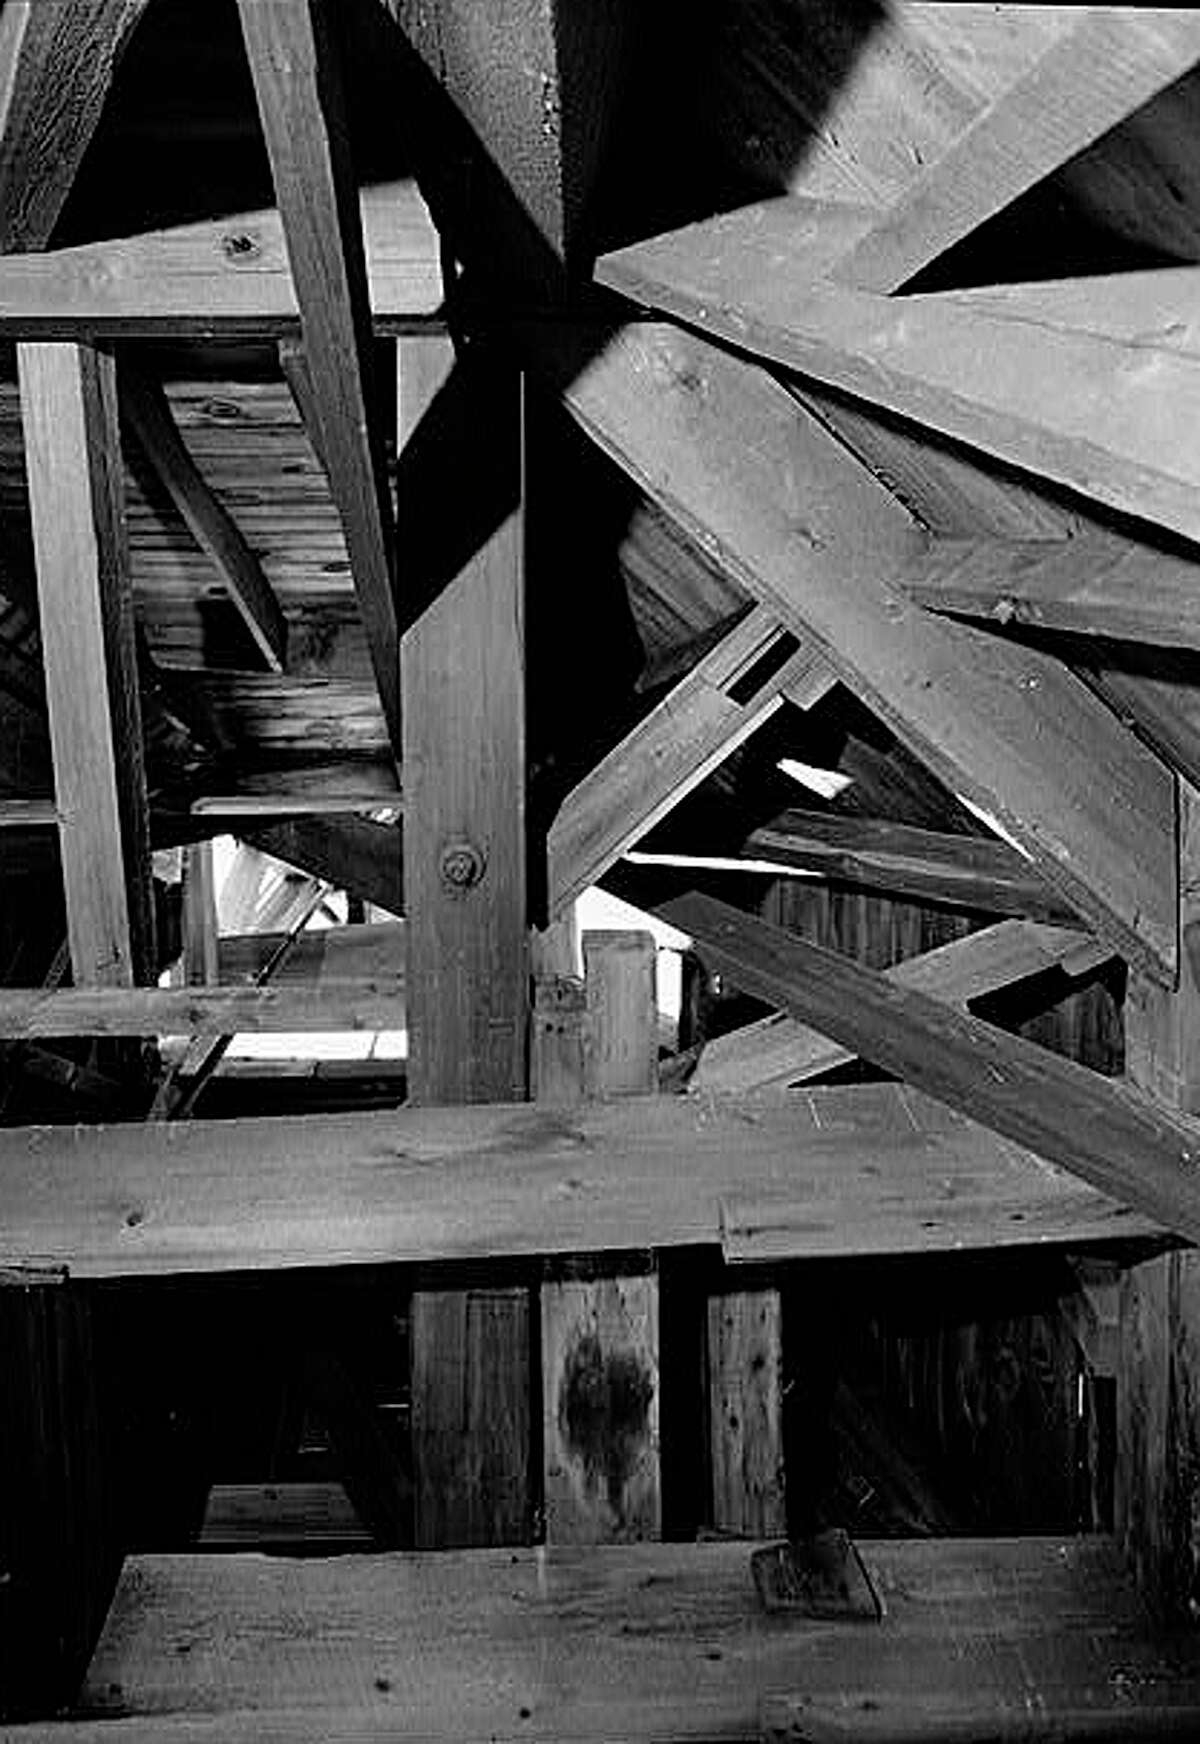 Looking up into the interior of the Bronson Windmill reveals a maze of wooden supports. The windmill pumped water from an underground water tank and cistern at the bottom of the windmill. Courtesy: Library of Congress.